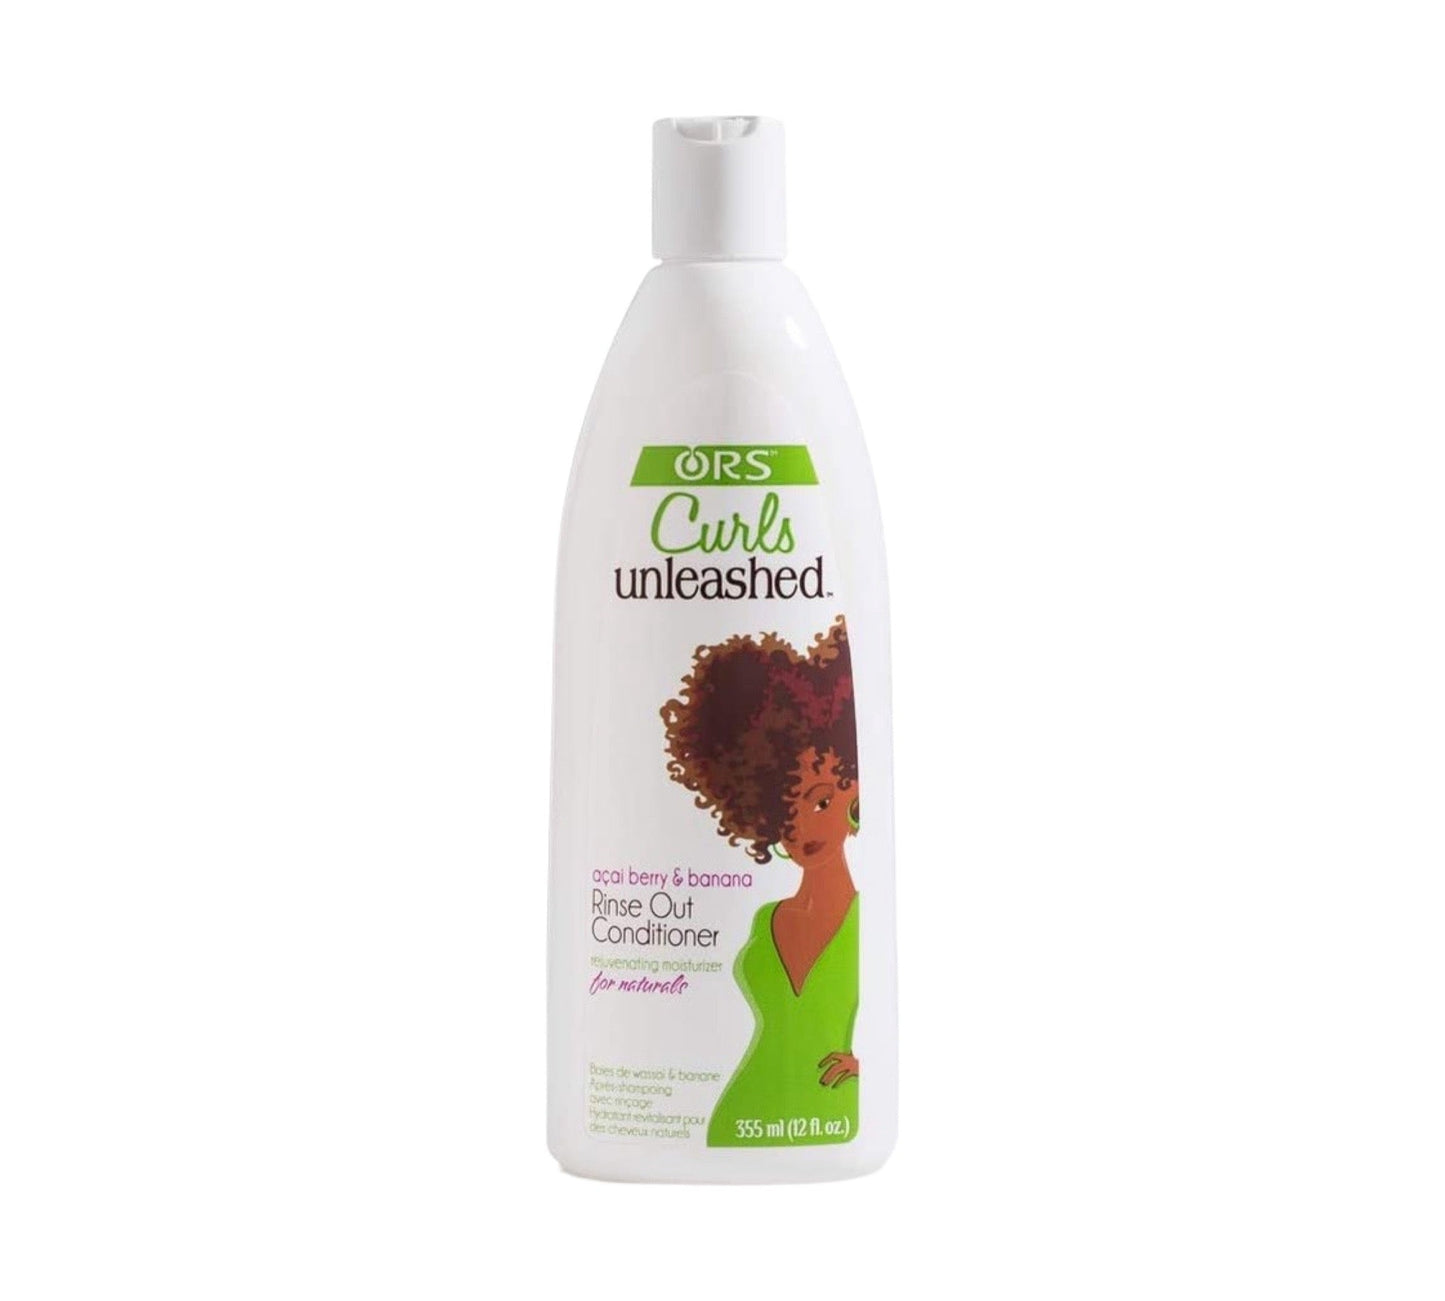 Ors Curls Unleashed Acai Berry And Banana Rinse Out Conditioner, 12 Oz